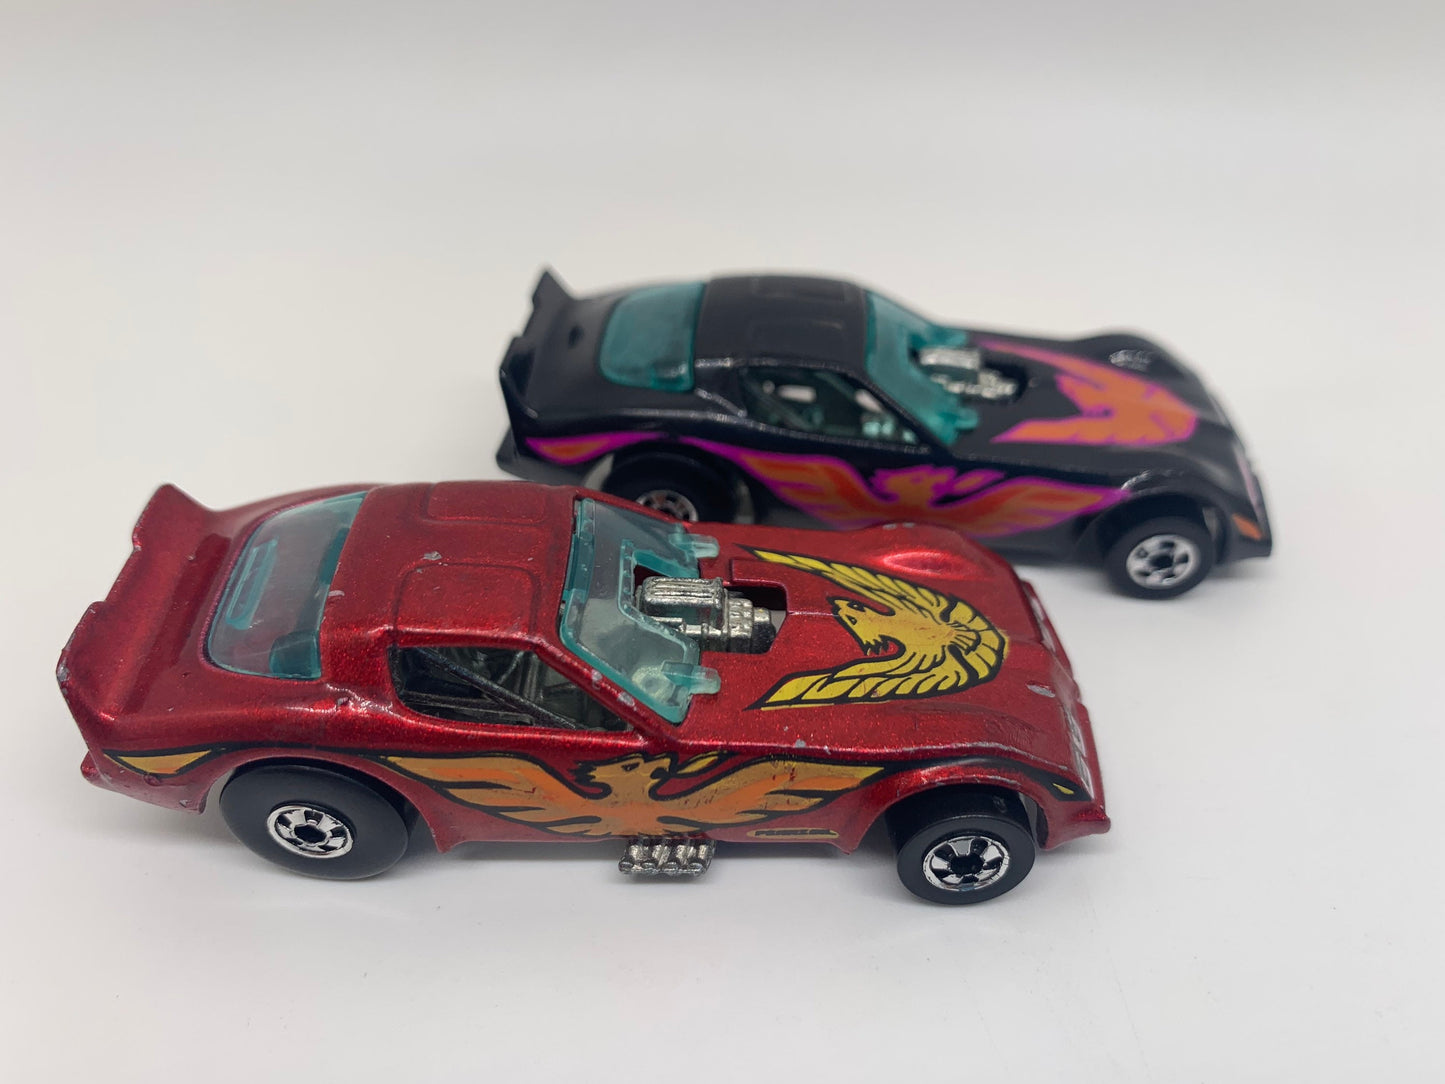 Hot Wheels Firebird Funny Car Red Mainline Black Kelloggs Perfect Birthday Gift Collectible Diecast 164 Scale Model Toy Car